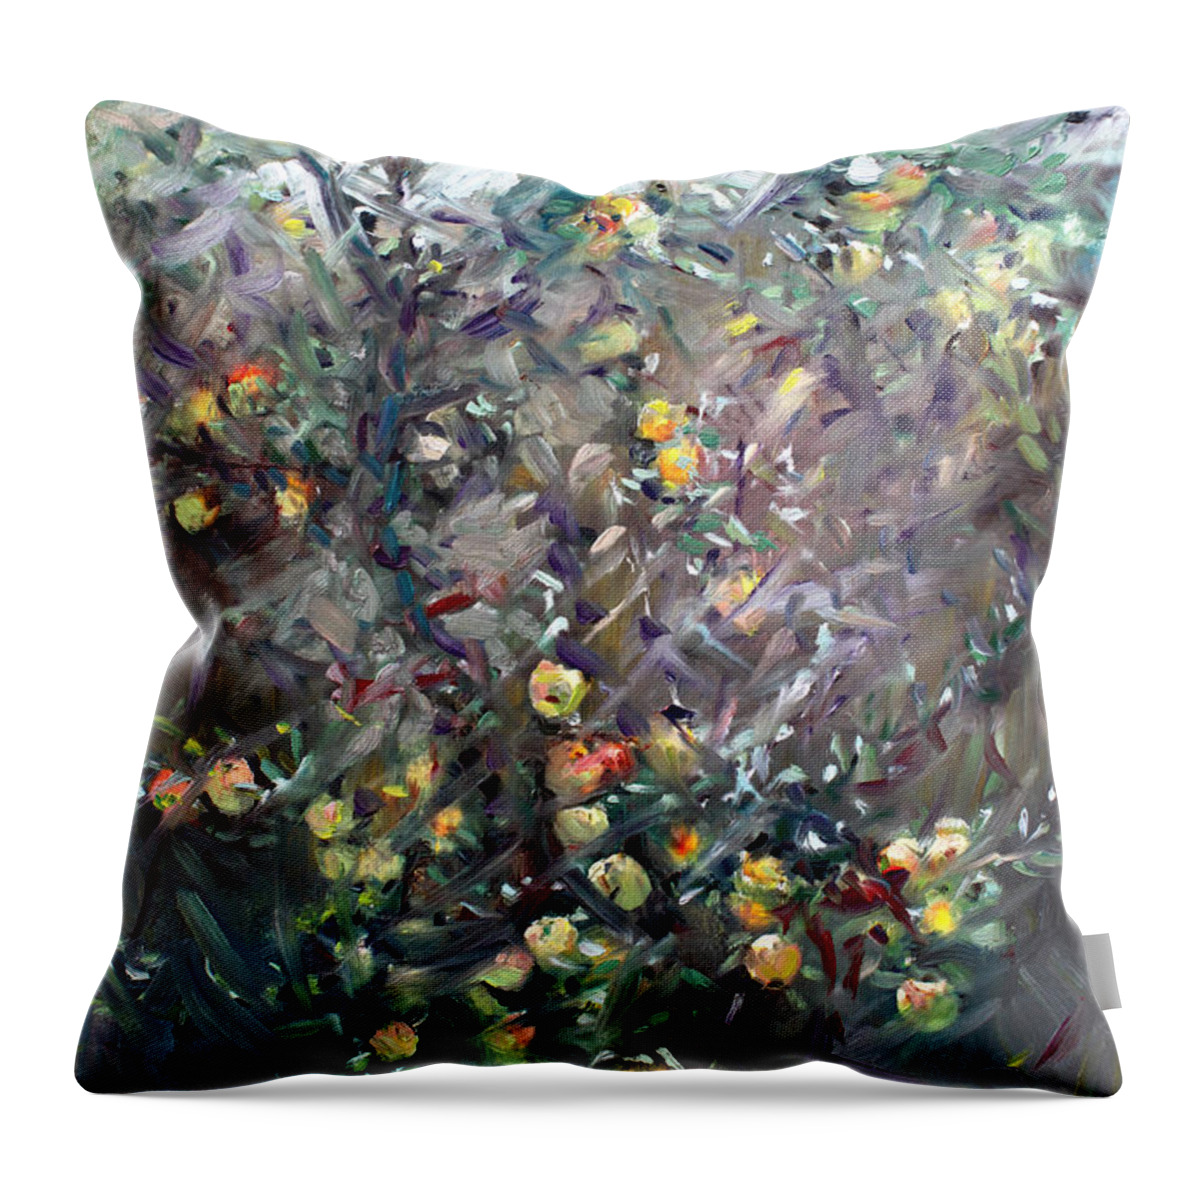 Apples Throw Pillow featuring the painting Apple Tree by Ylli Haruni